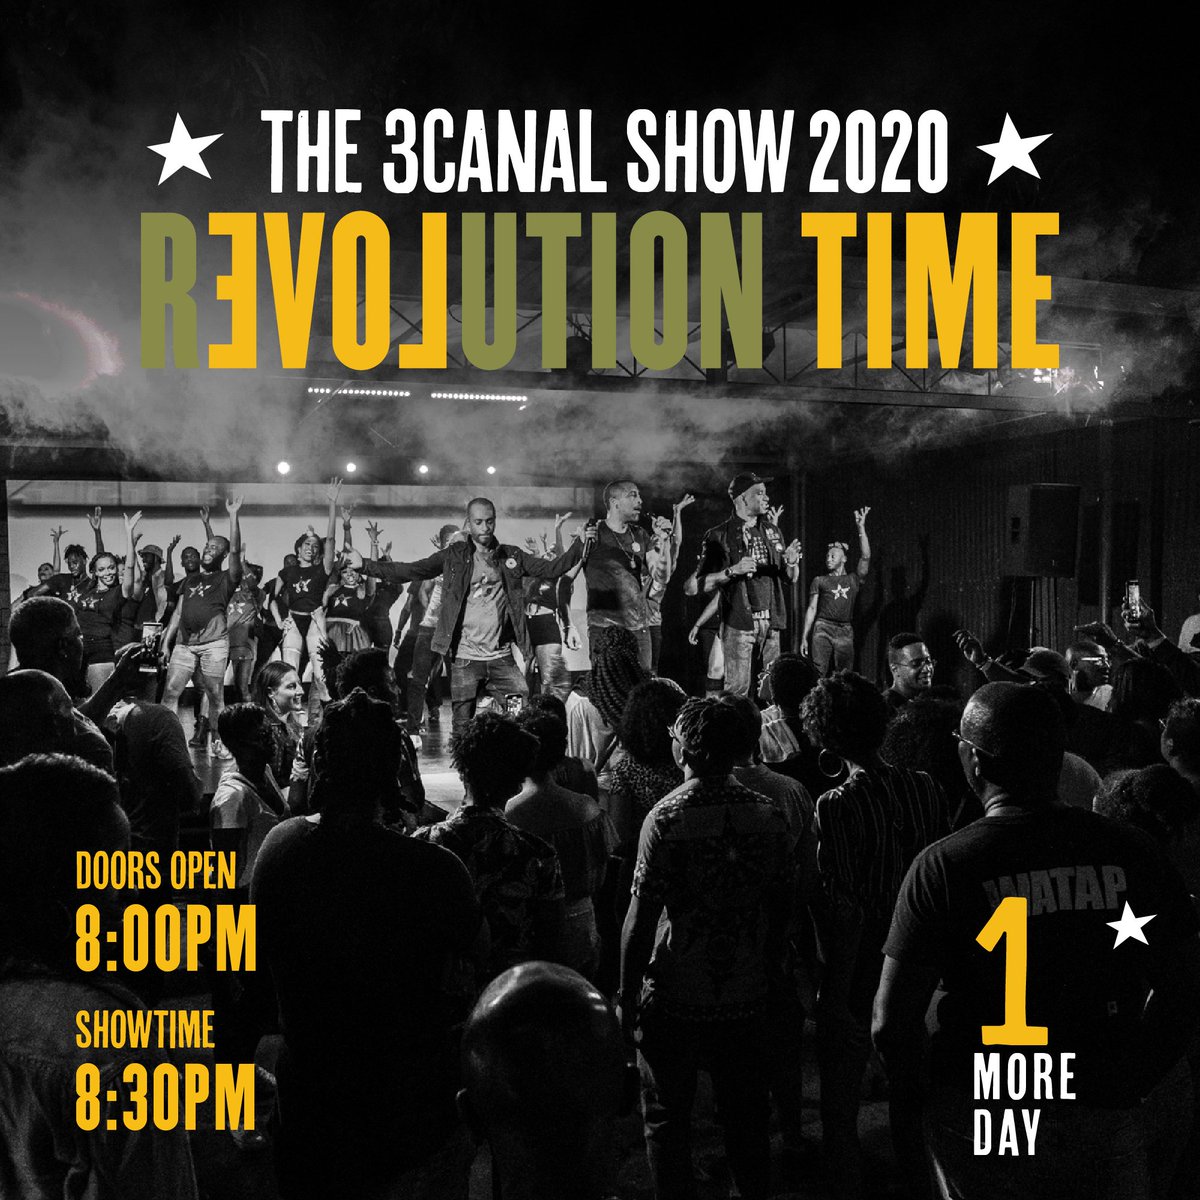 “If a man want to set false standards for you to follow, to he what yuh say? Blow Way.” – Lancelot Layne 'Blow Way,' 1970. Come down to @BigBlackBoxTT TOMORROW for #3canalShow2020. We booming up history + bringing the rEVOLution! Tickets: bit.ly/3cnlshow2020tx or at the Box.